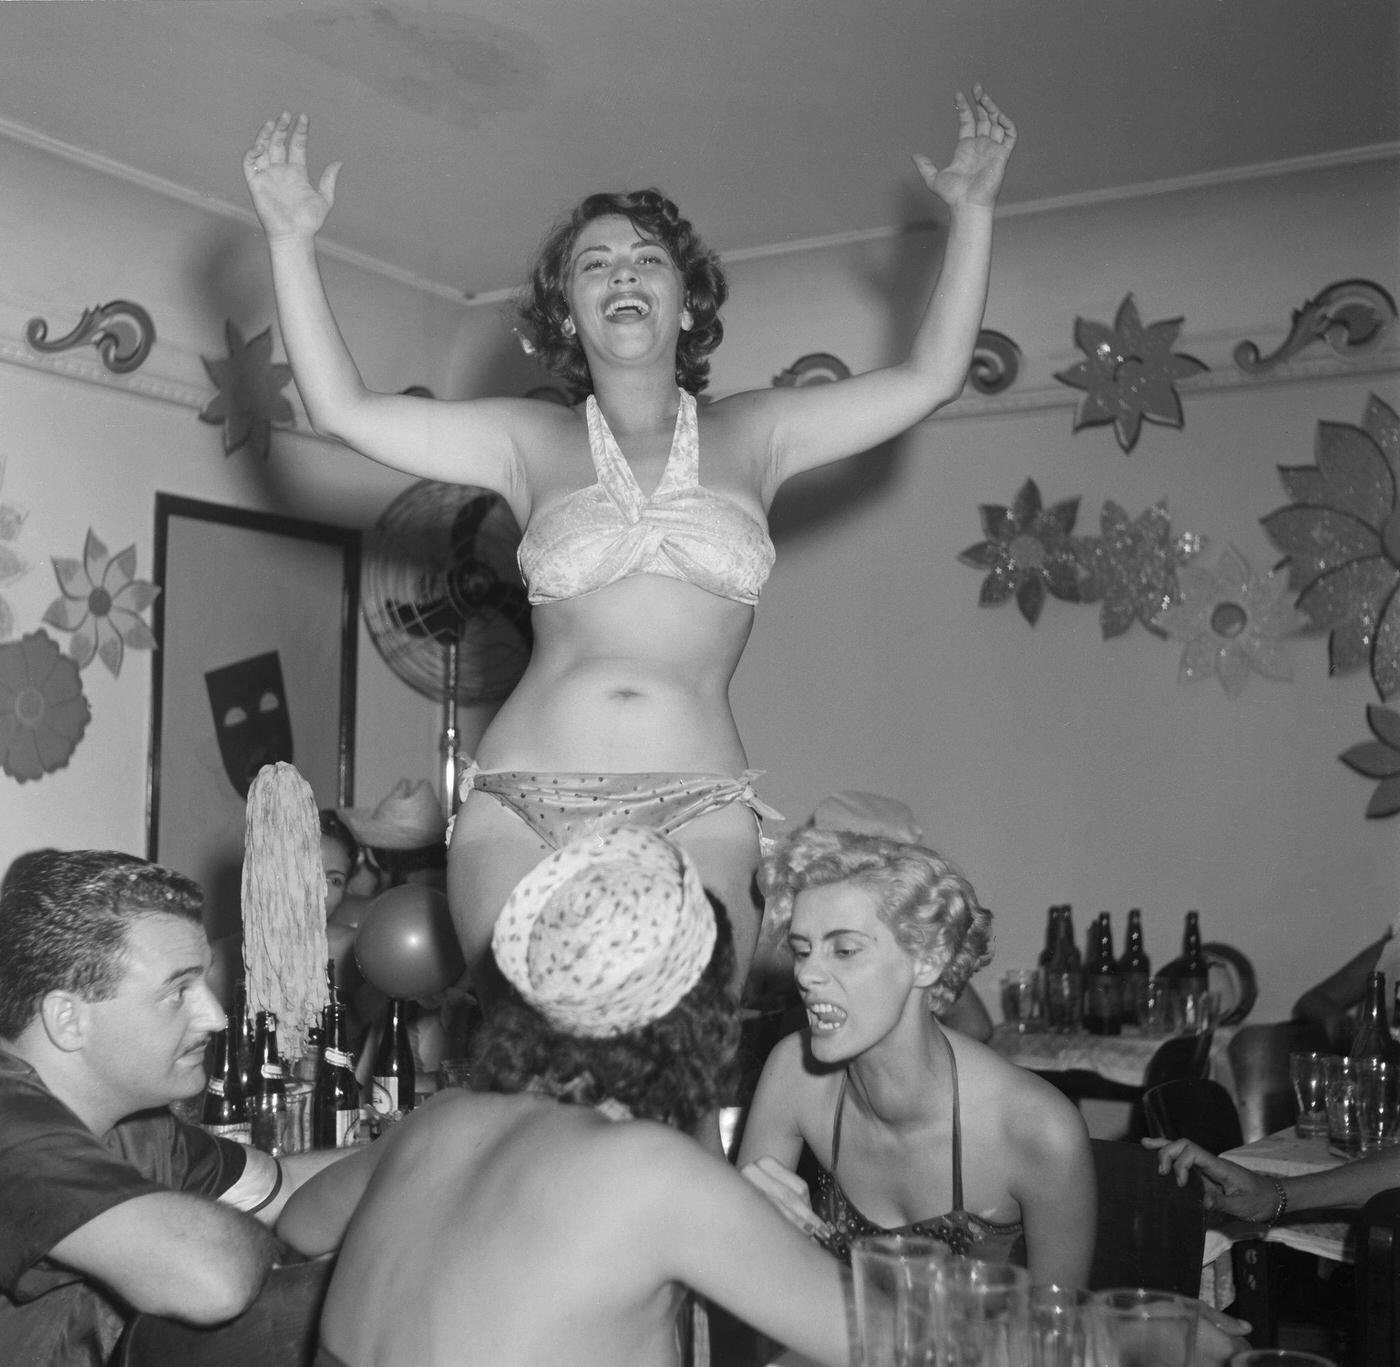 Costume Partygoers, Rio Carnival 1953